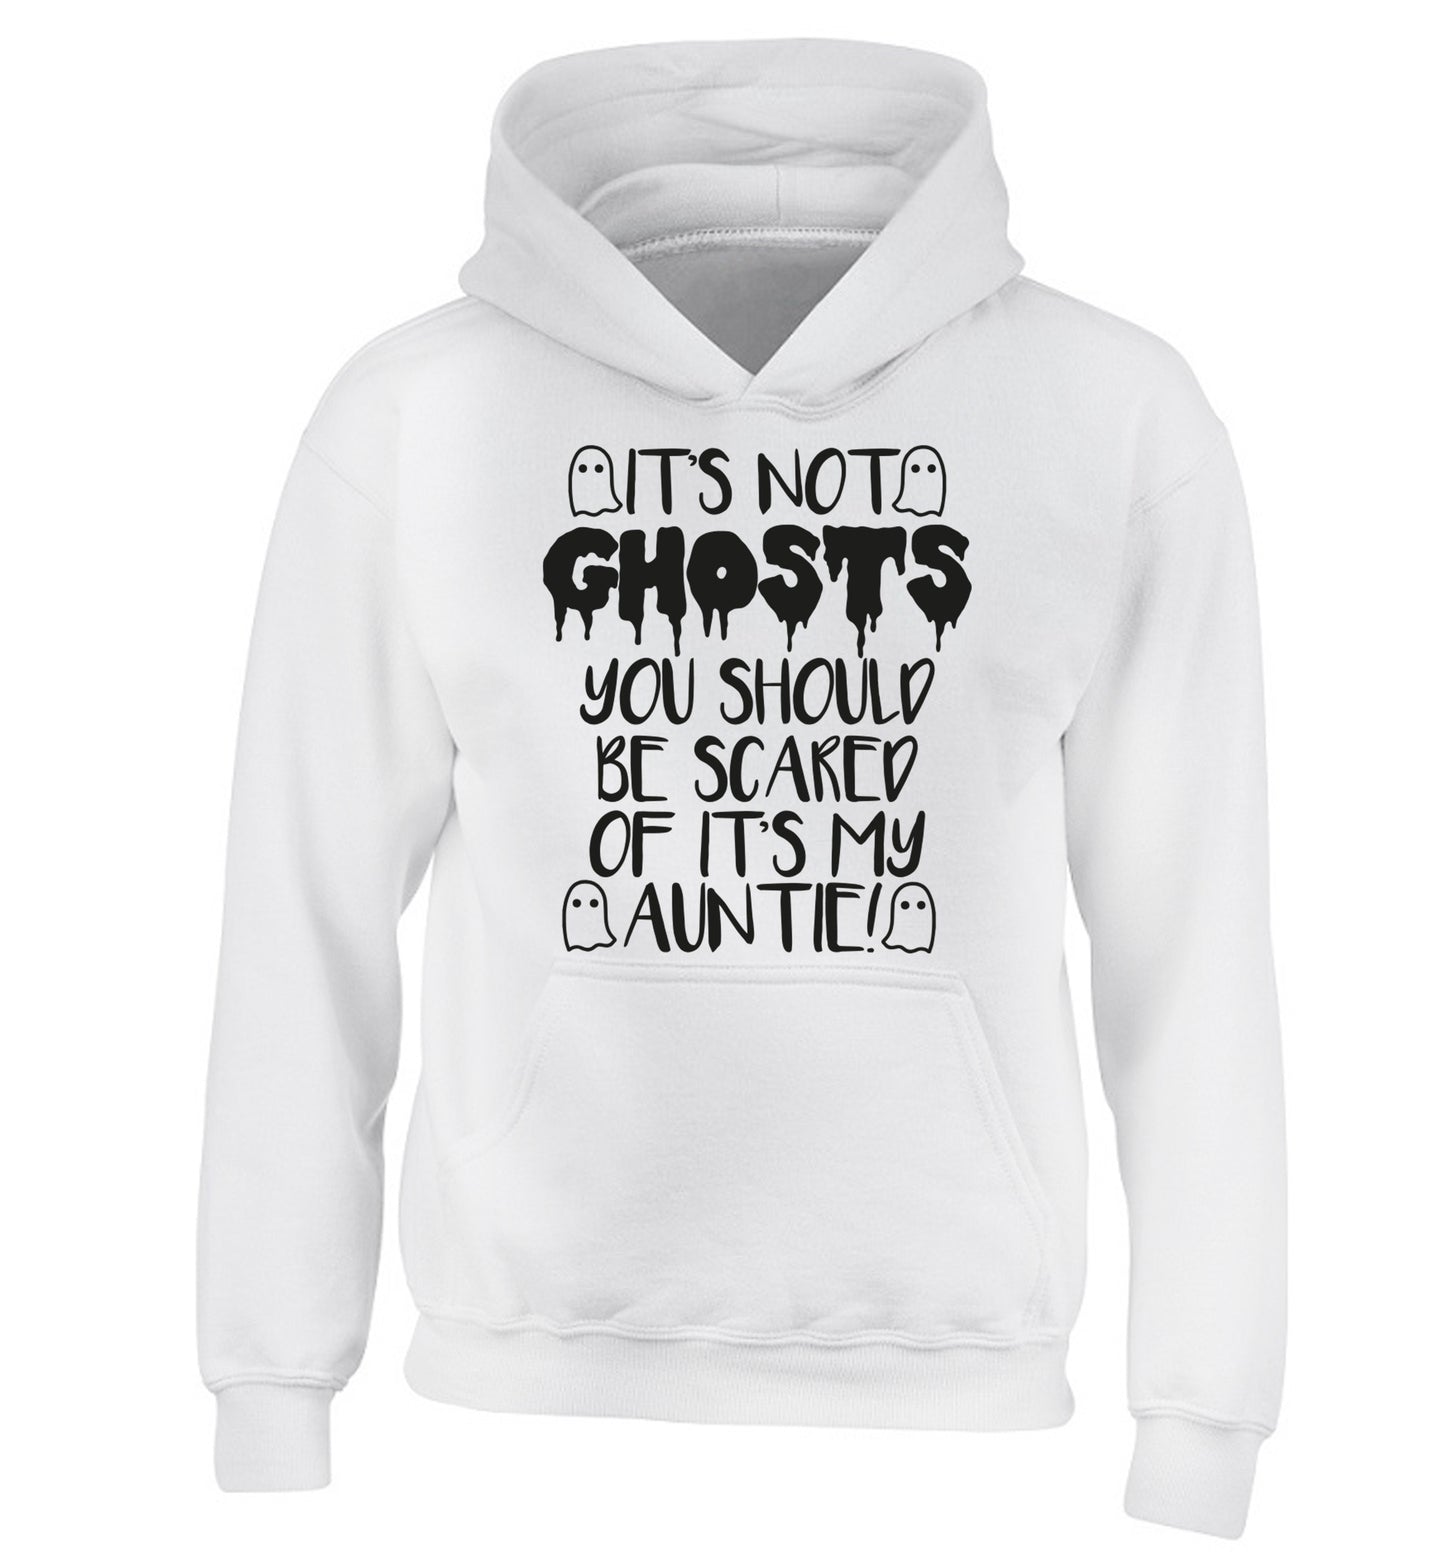 It's not ghosts you should be scared of it's my auntie! children's white hoodie 12-14 Years